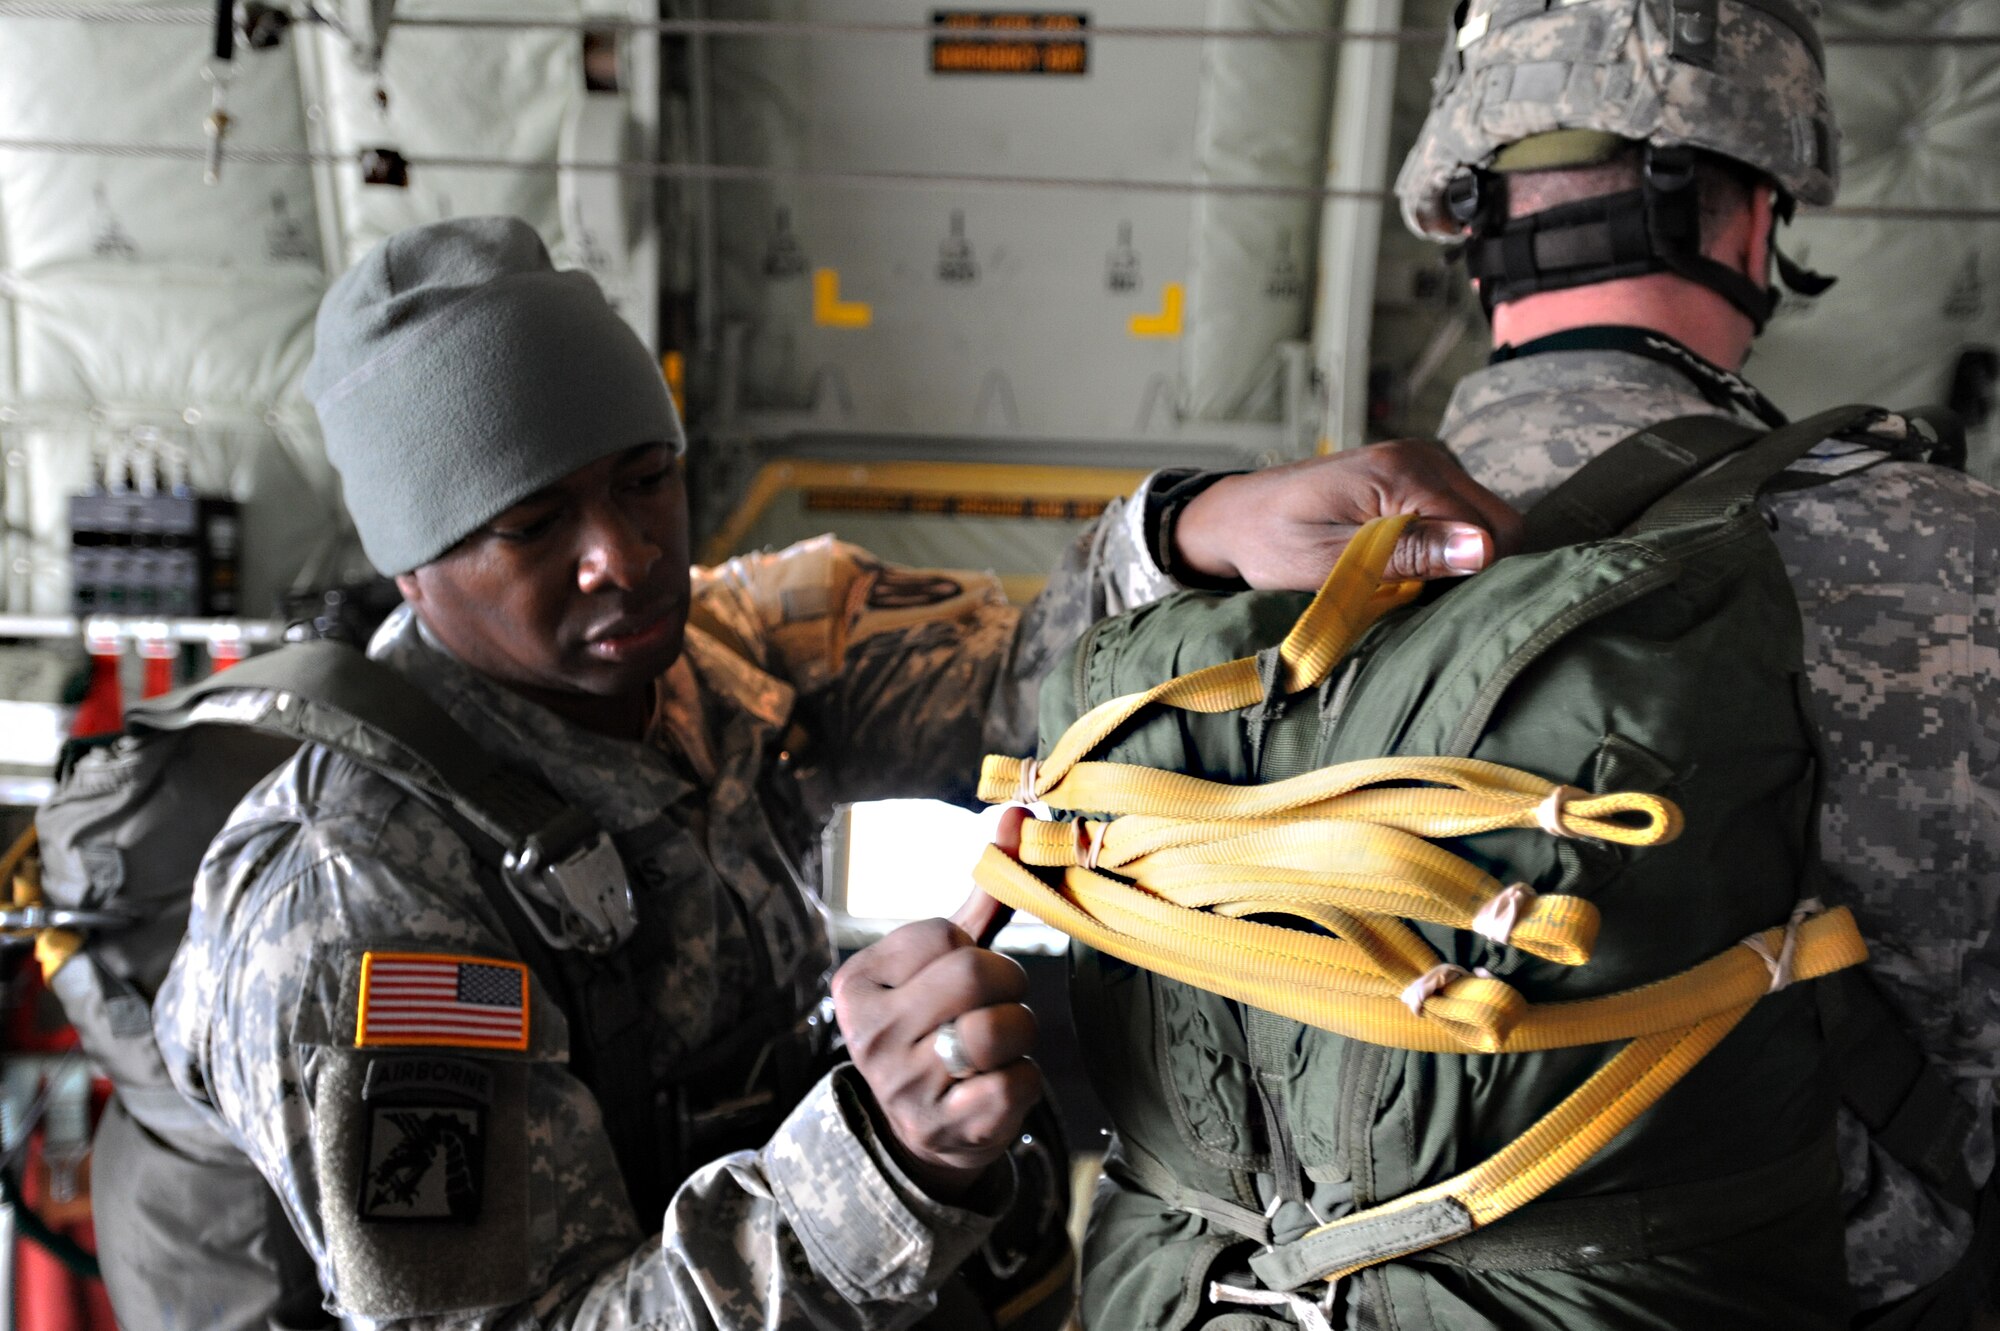 Army Sgt. 1st Class Herschel L. Gillins, 5th Quarter Master from Rine Ordanance Barracks, secures another  paratroopers flight equipment during an off-station training in Zaragoza, Spain., Dec. 12, 2011. The OST consisted of a 90 member team and two aircraft, all assembled to enhance interoperability between U.S. and Spanish air forces as well as build partnerships between the two countries. (U.S. Air Force photo by Airman 1st Class Caitlin O'Neil-McKeown)